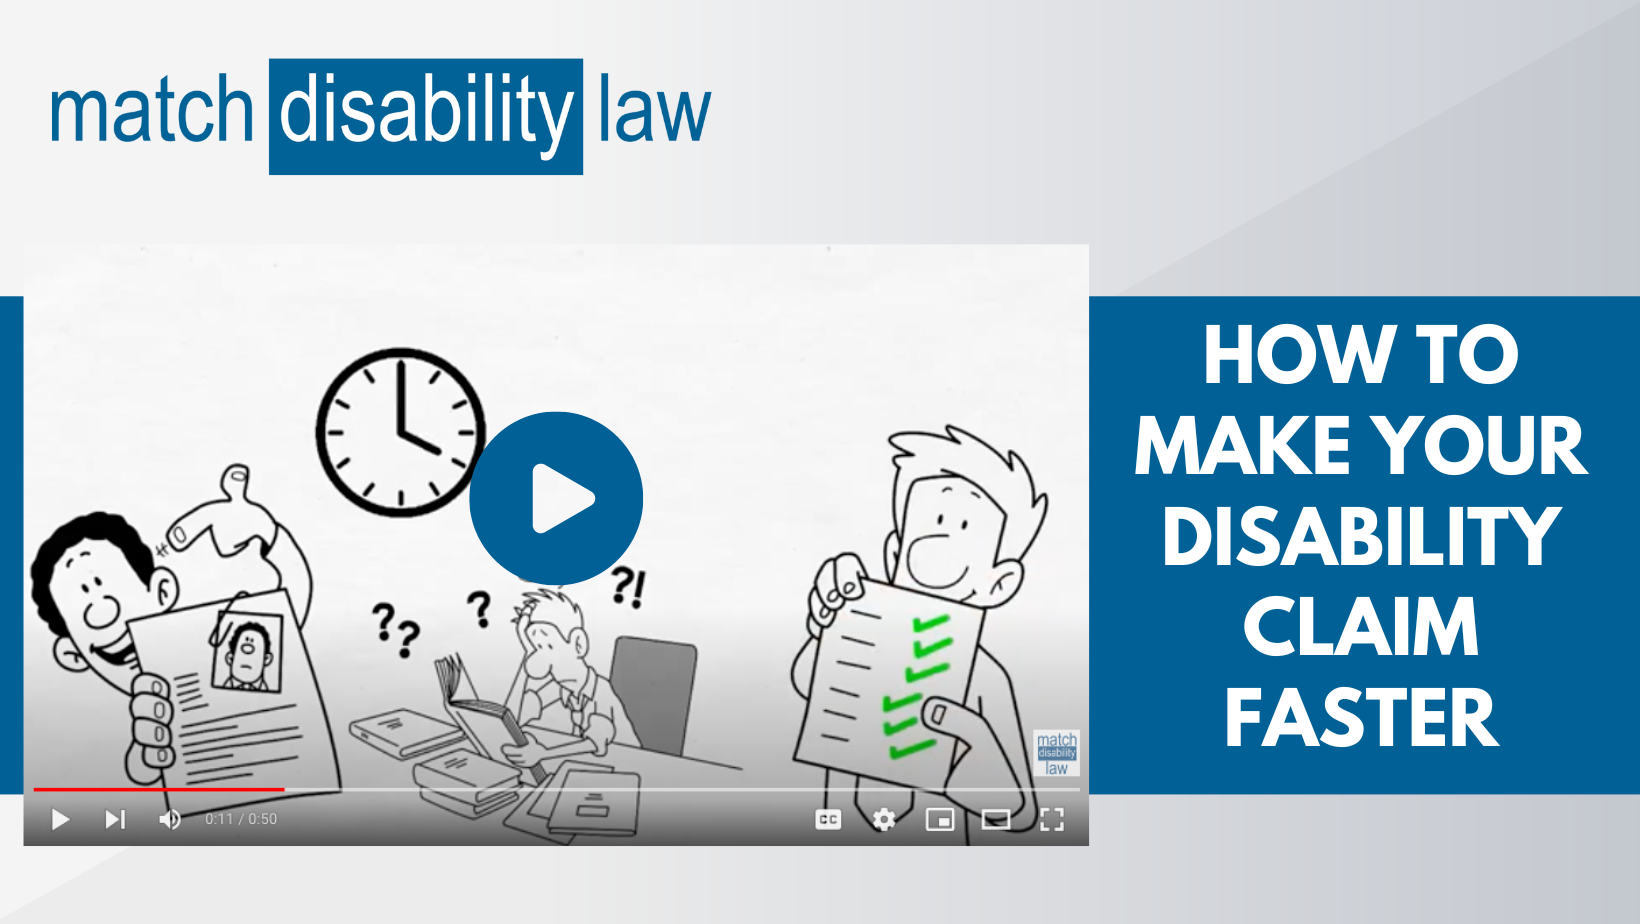 how to make your disability claim faster, Marva Match Disability Security Law Social Security Disability Attorneys, Utah Social Security Law, disability benefits, get assistance, help and benefits, free help, ssdi, benefits, disability security